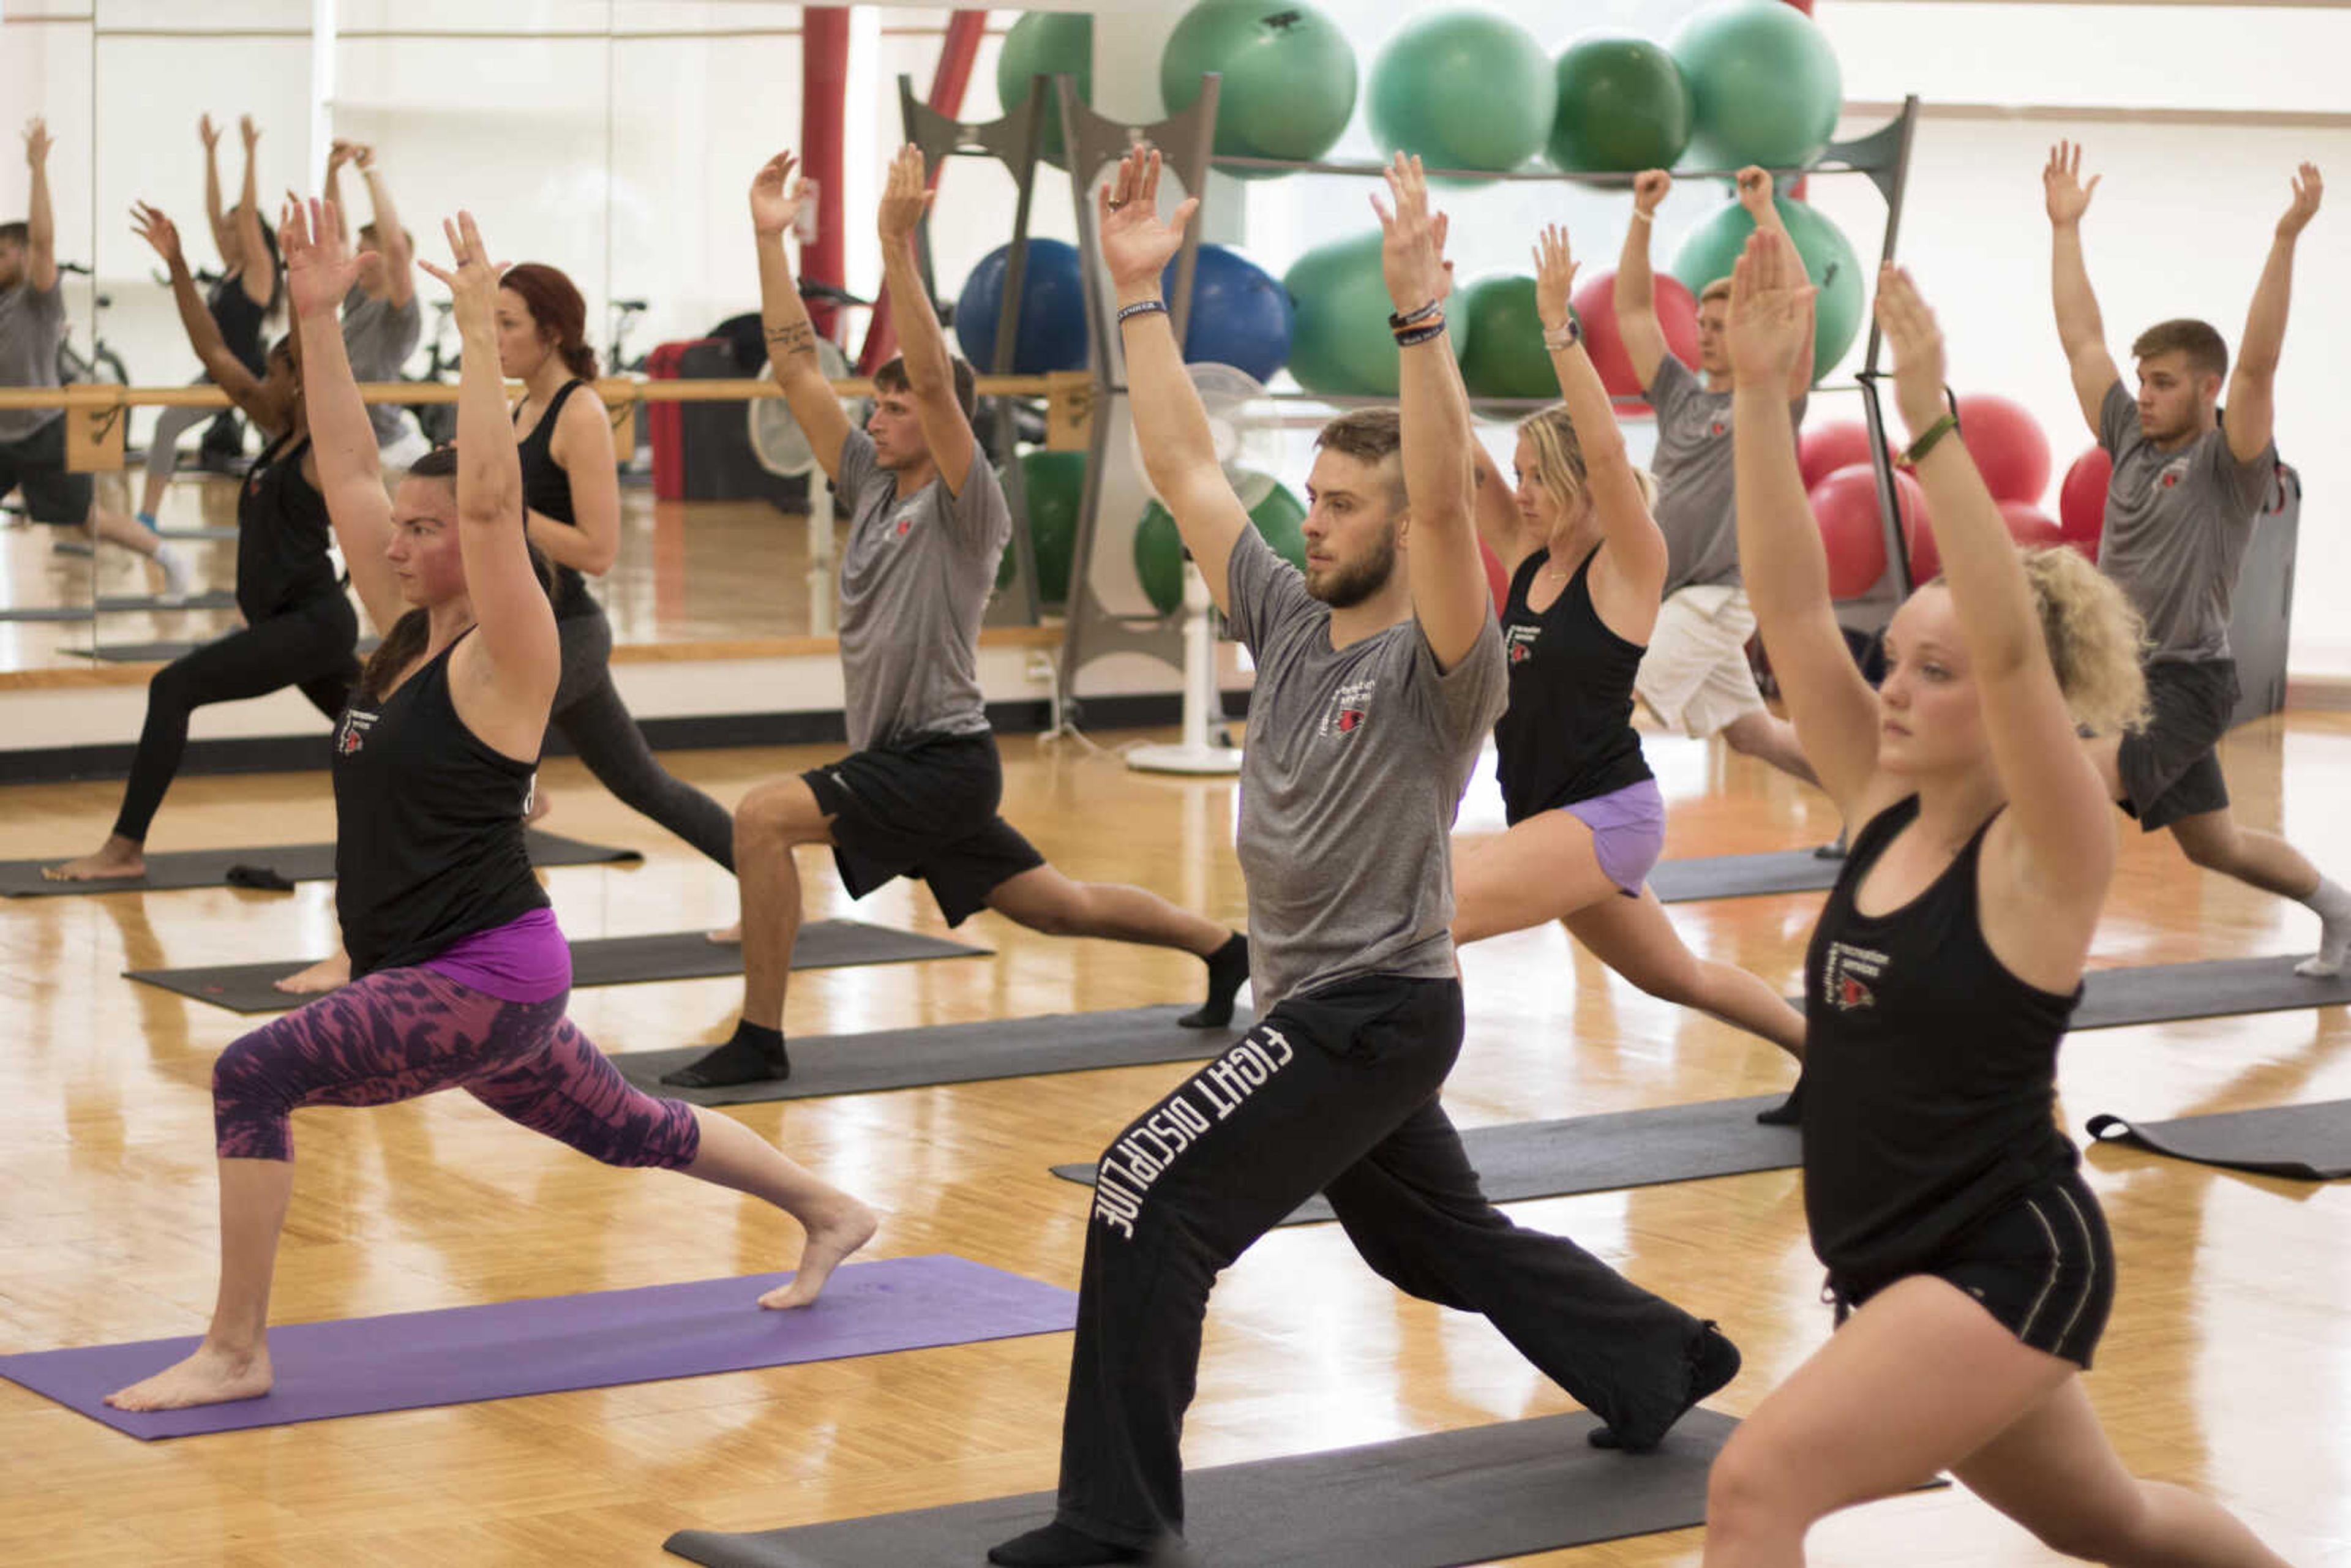 Southeast student fitness instructors participate in a yoga fitness class as part of their training Wednesday, Aug. 7.